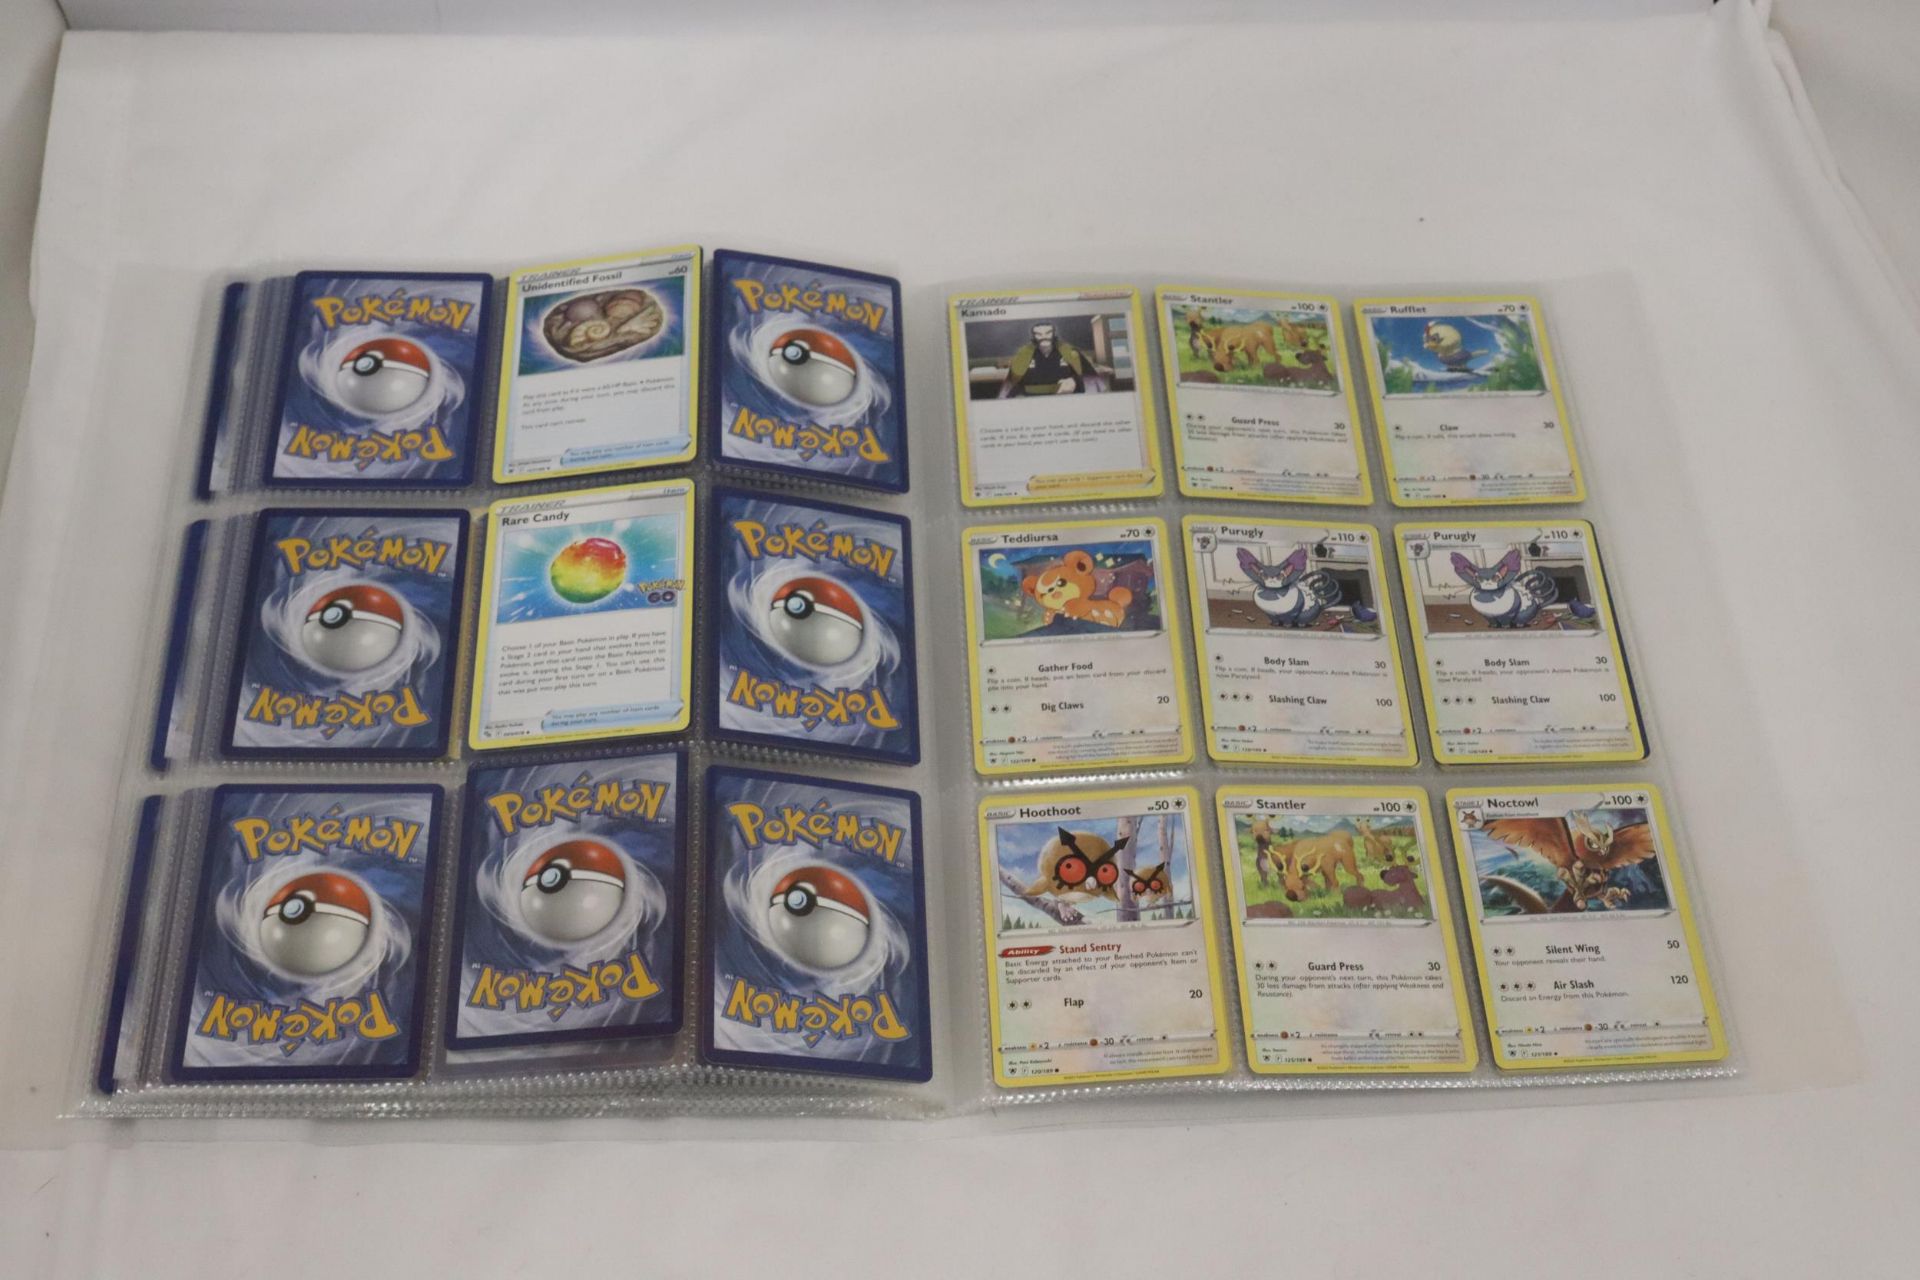 A PROTECTIVE TRADING CARD BINDER FULL OF POKEMON CARDS, INCLUDING SHINIES - Image 3 of 5